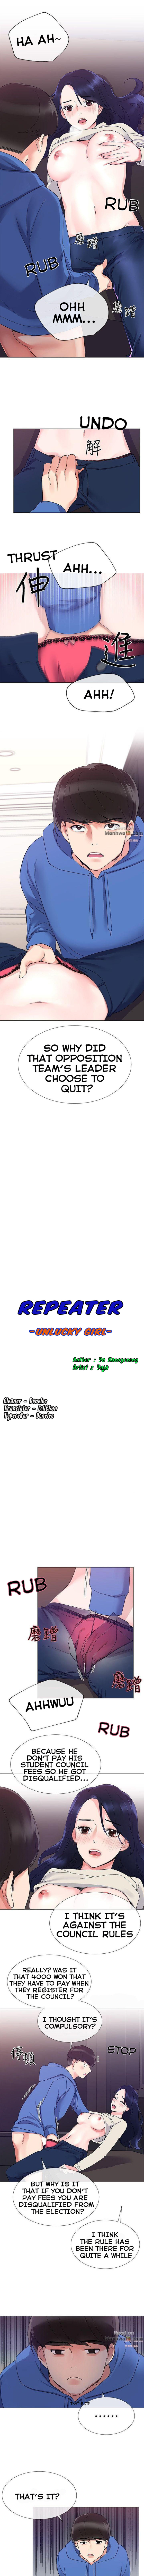 Repeater Chapter 11 - Page 1